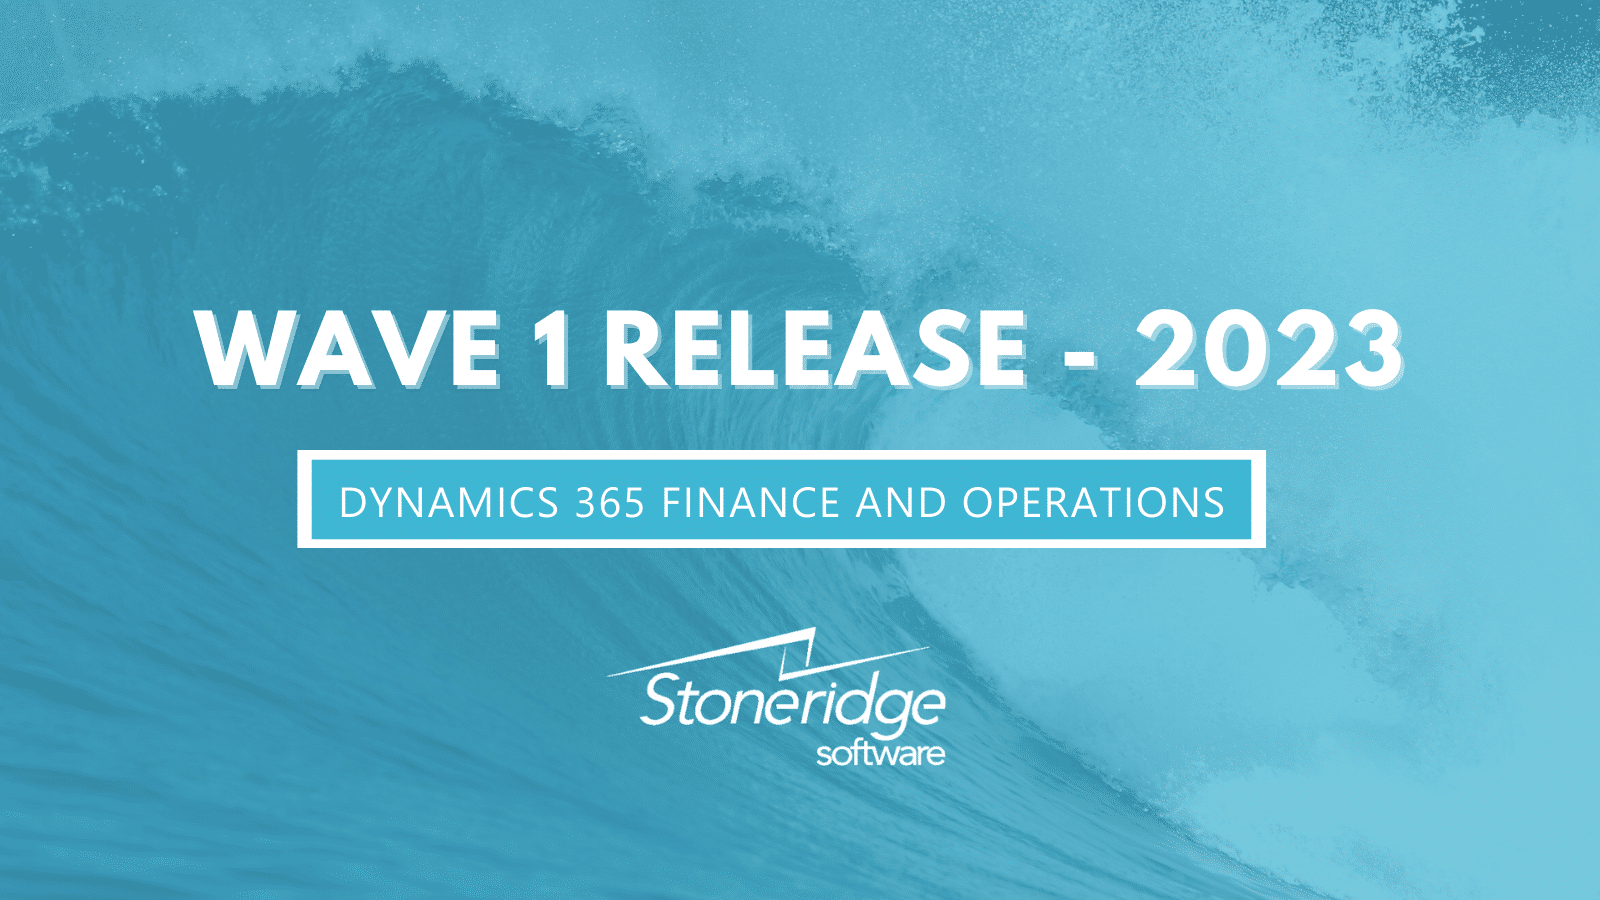 2023 Release Wave 1 for Dynamics 365 Finance and Operations